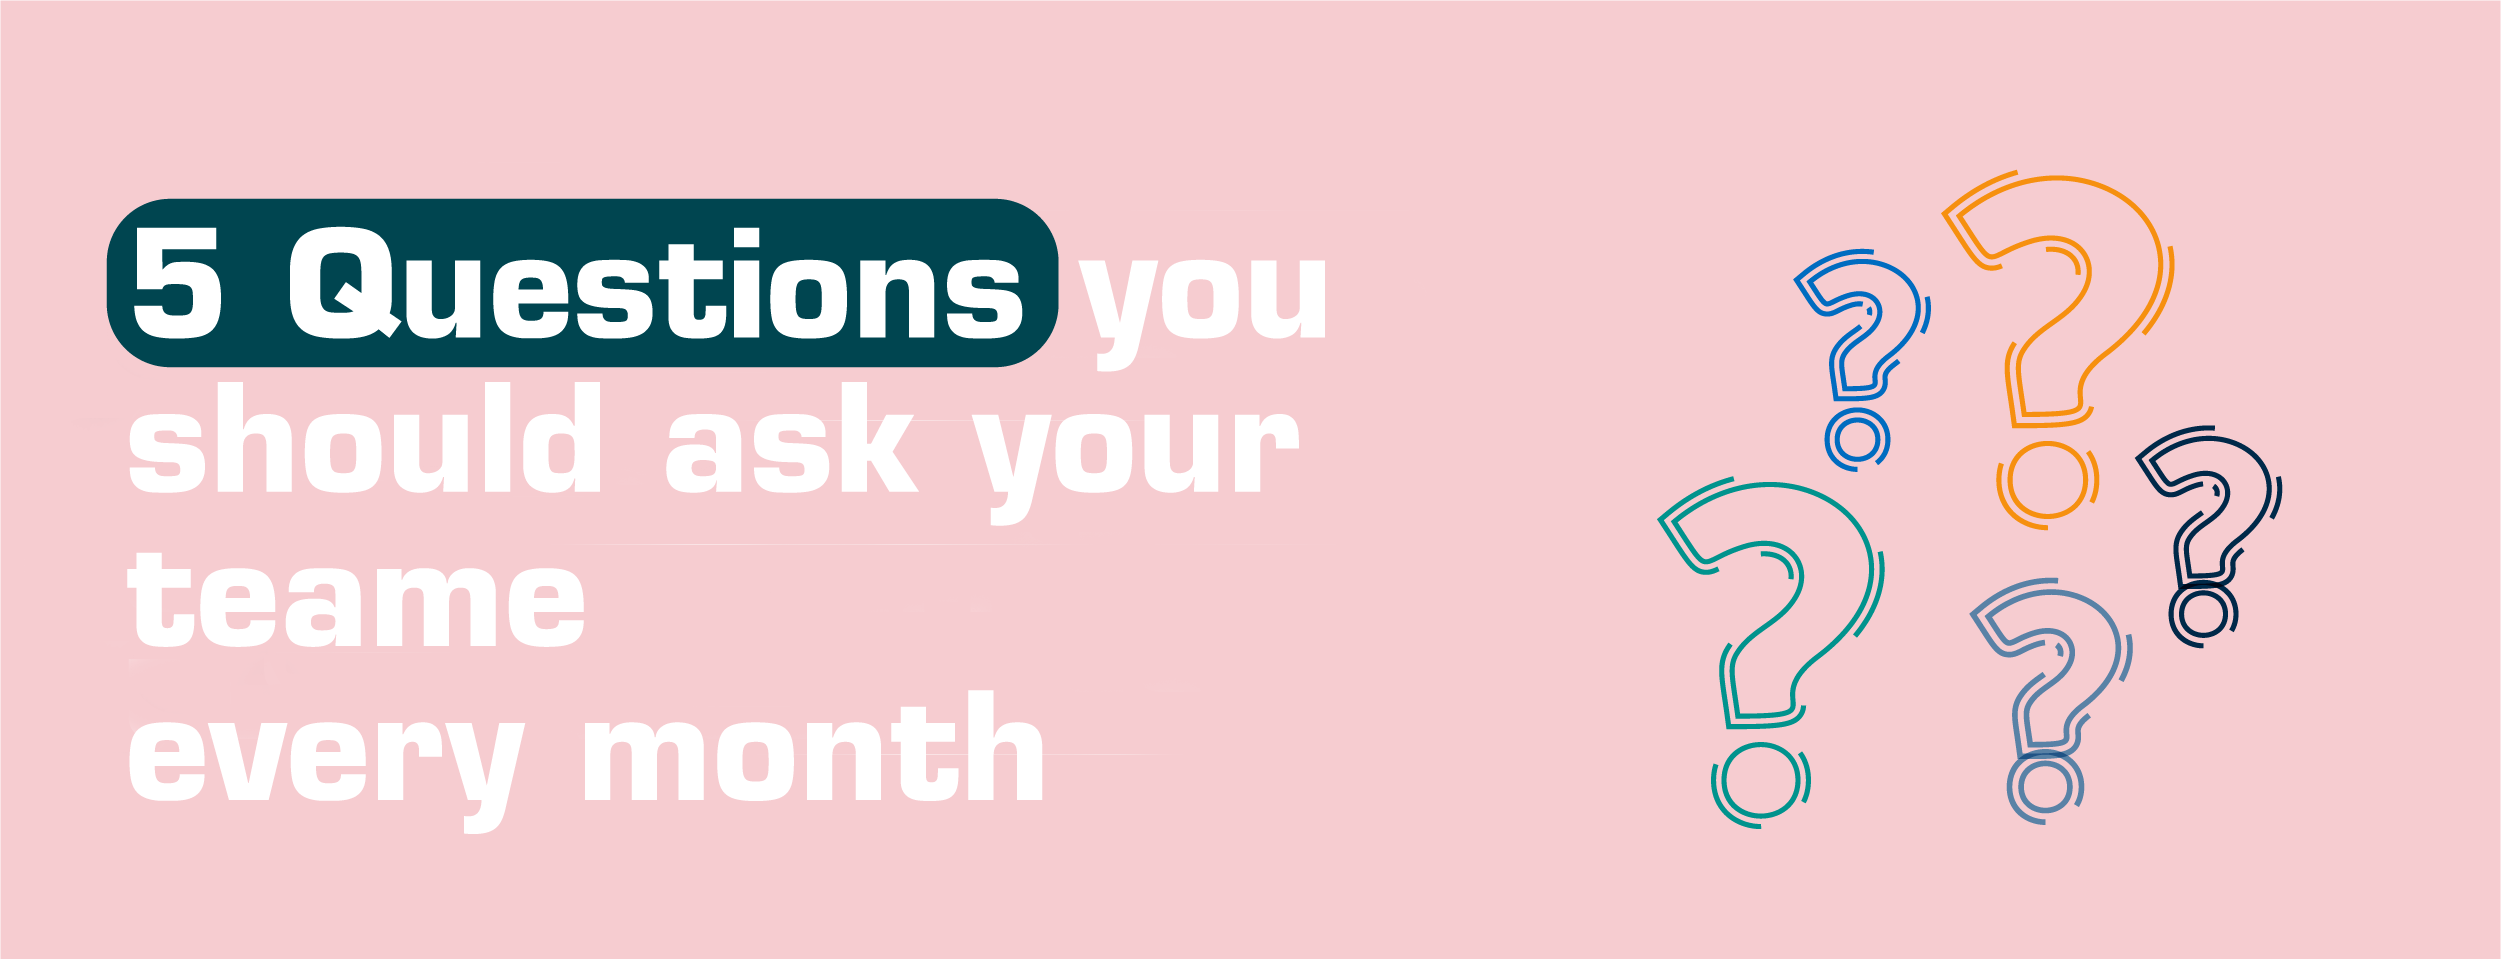 Five questions you should ask your team every month